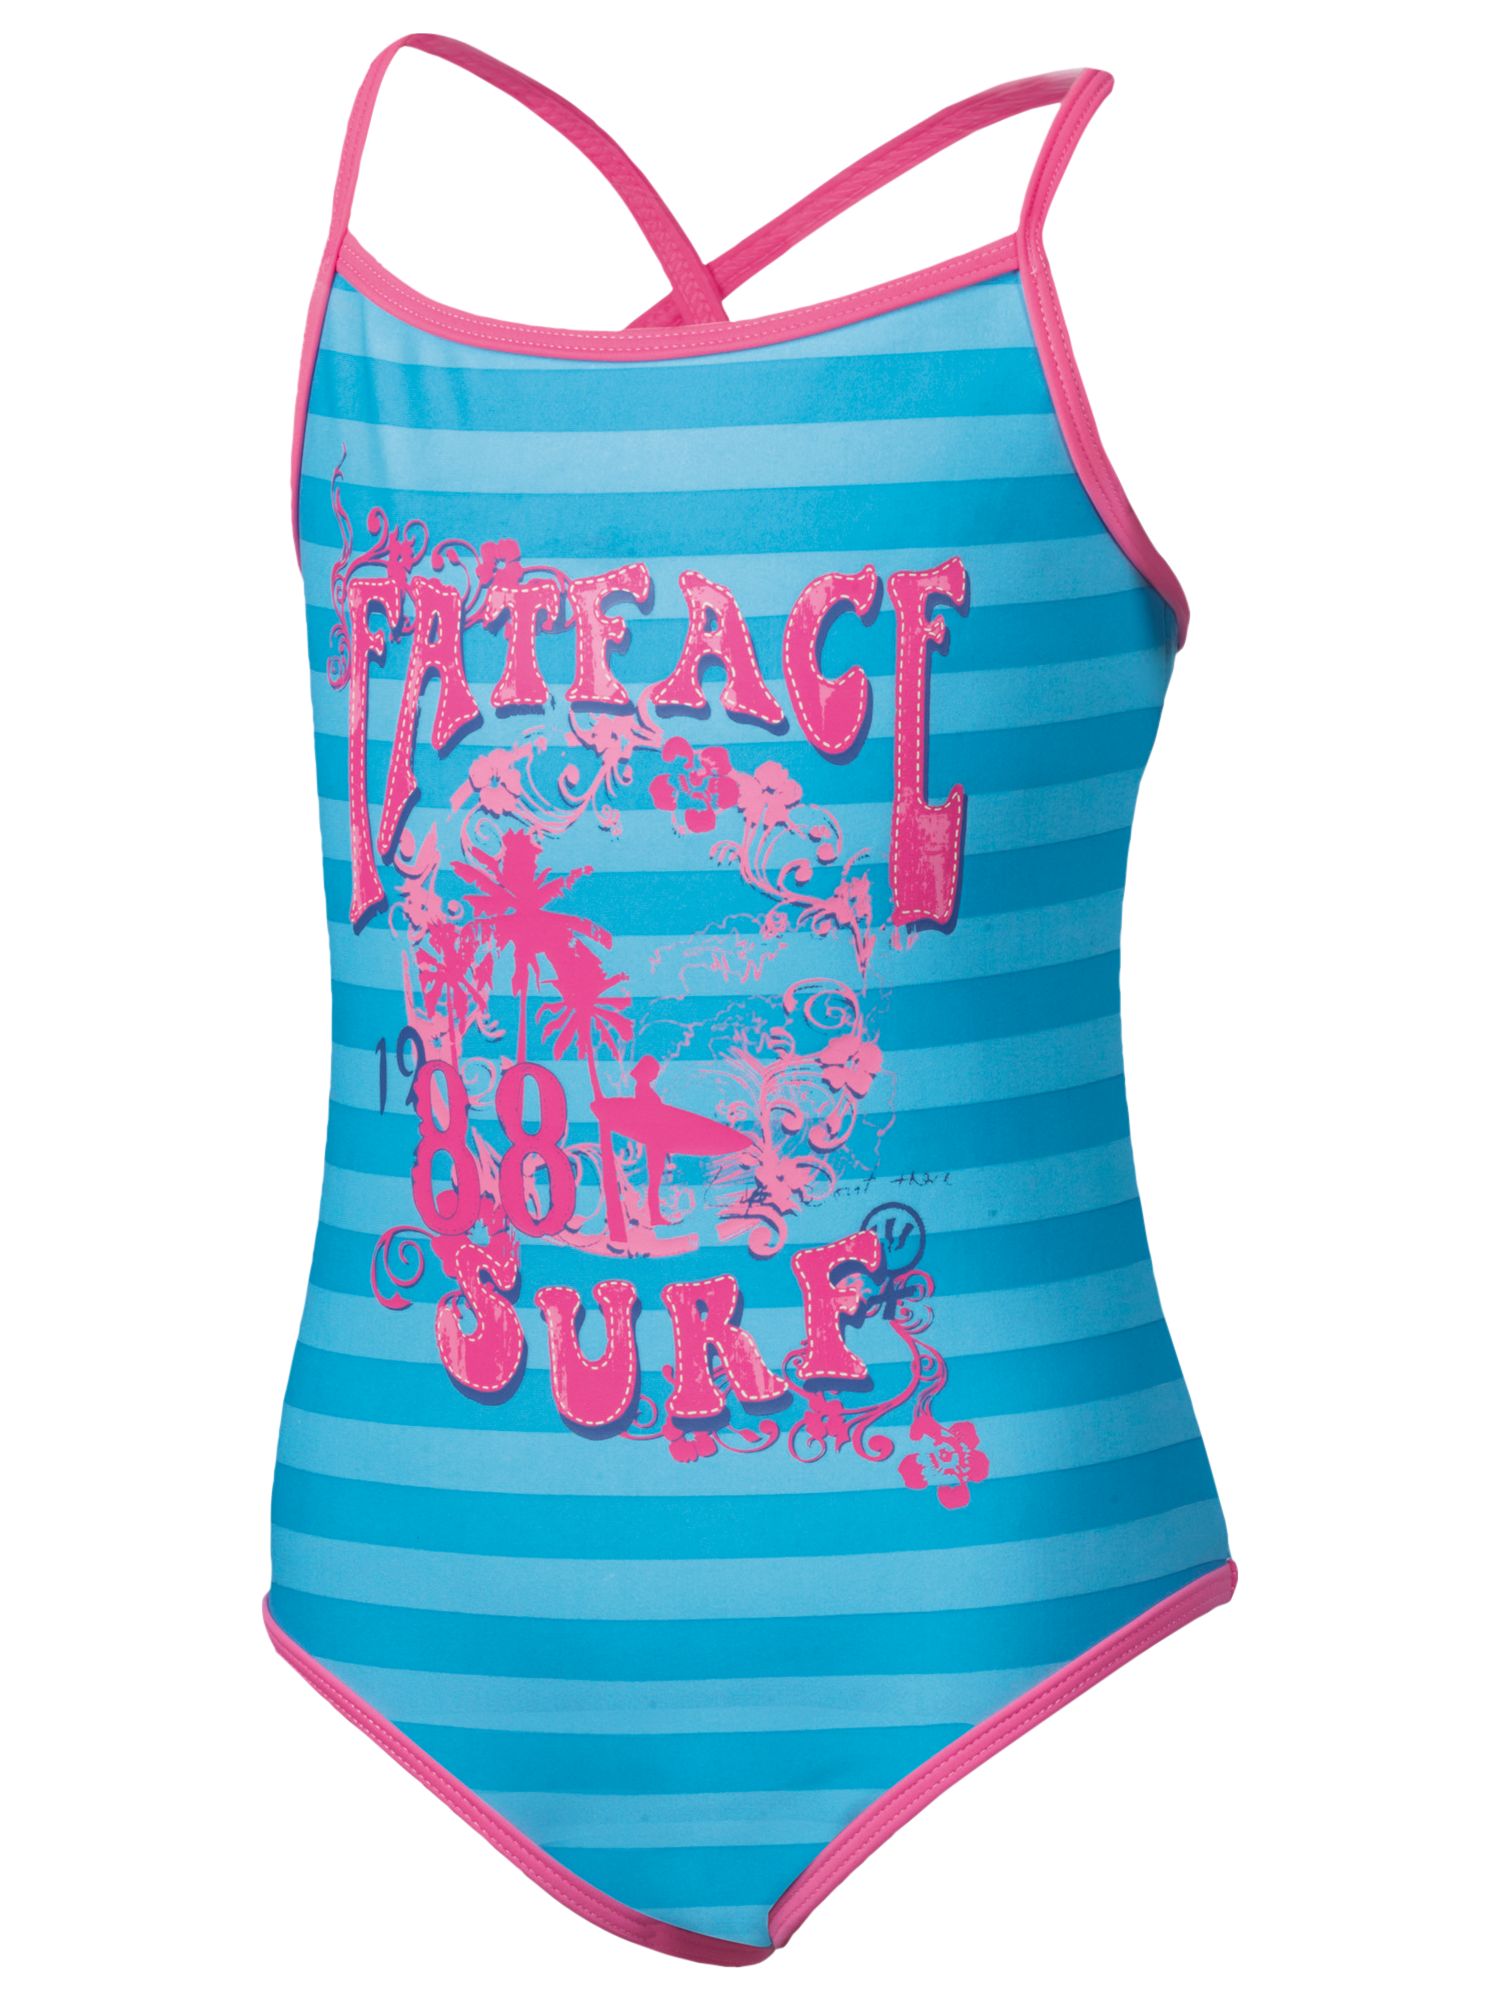 Fat Face Nita Swimsuit, Blue/Pink - review, compare prices, buy online